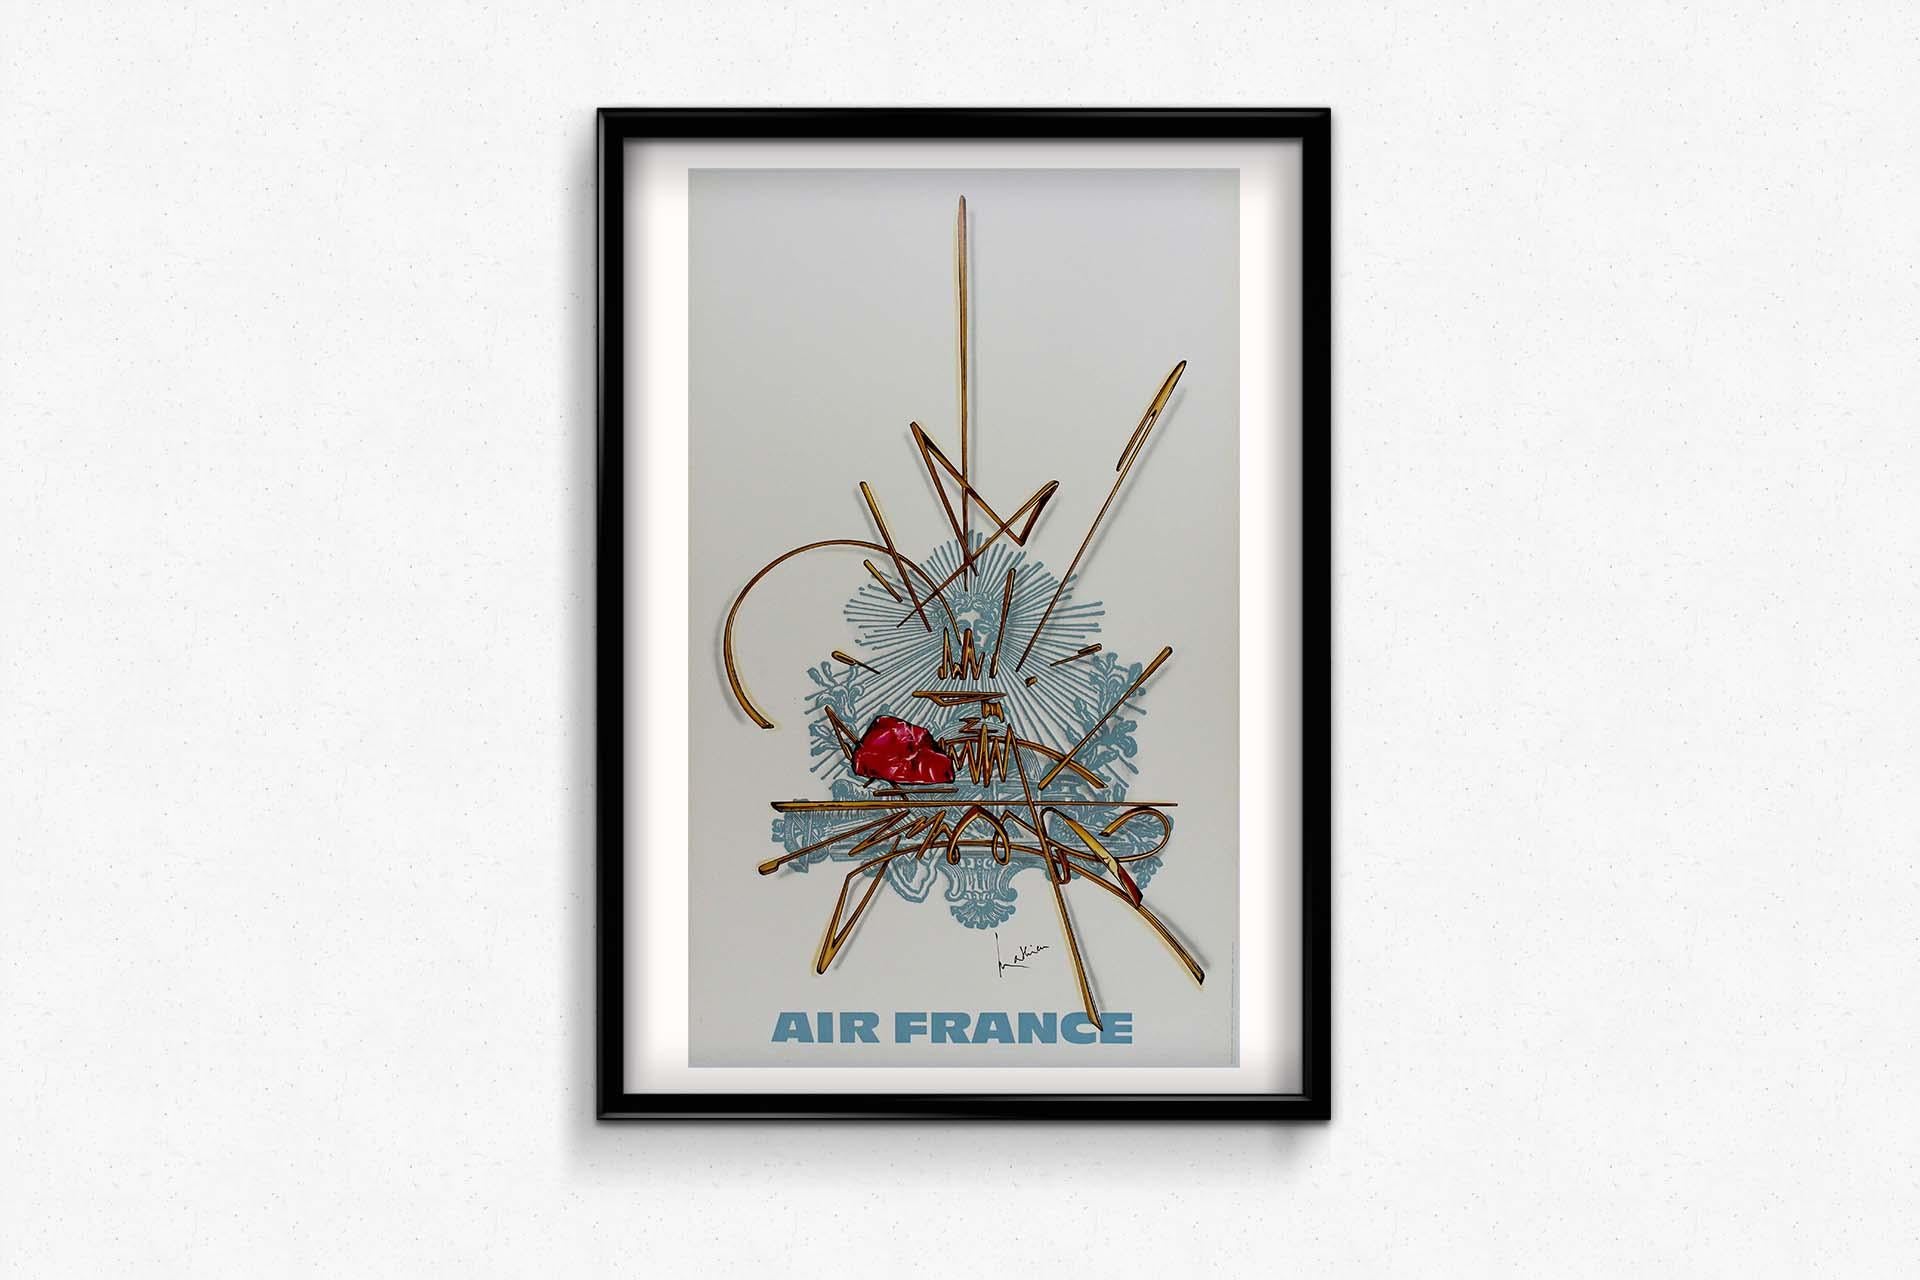 Mathieu's 1967 Air France Paris poster is a visual masterpiece that effortlessly transports us to an era of timeless elegance and sophistication. This iconic poster captures the allure of air travel in the late 1960s and is part of a remarkable